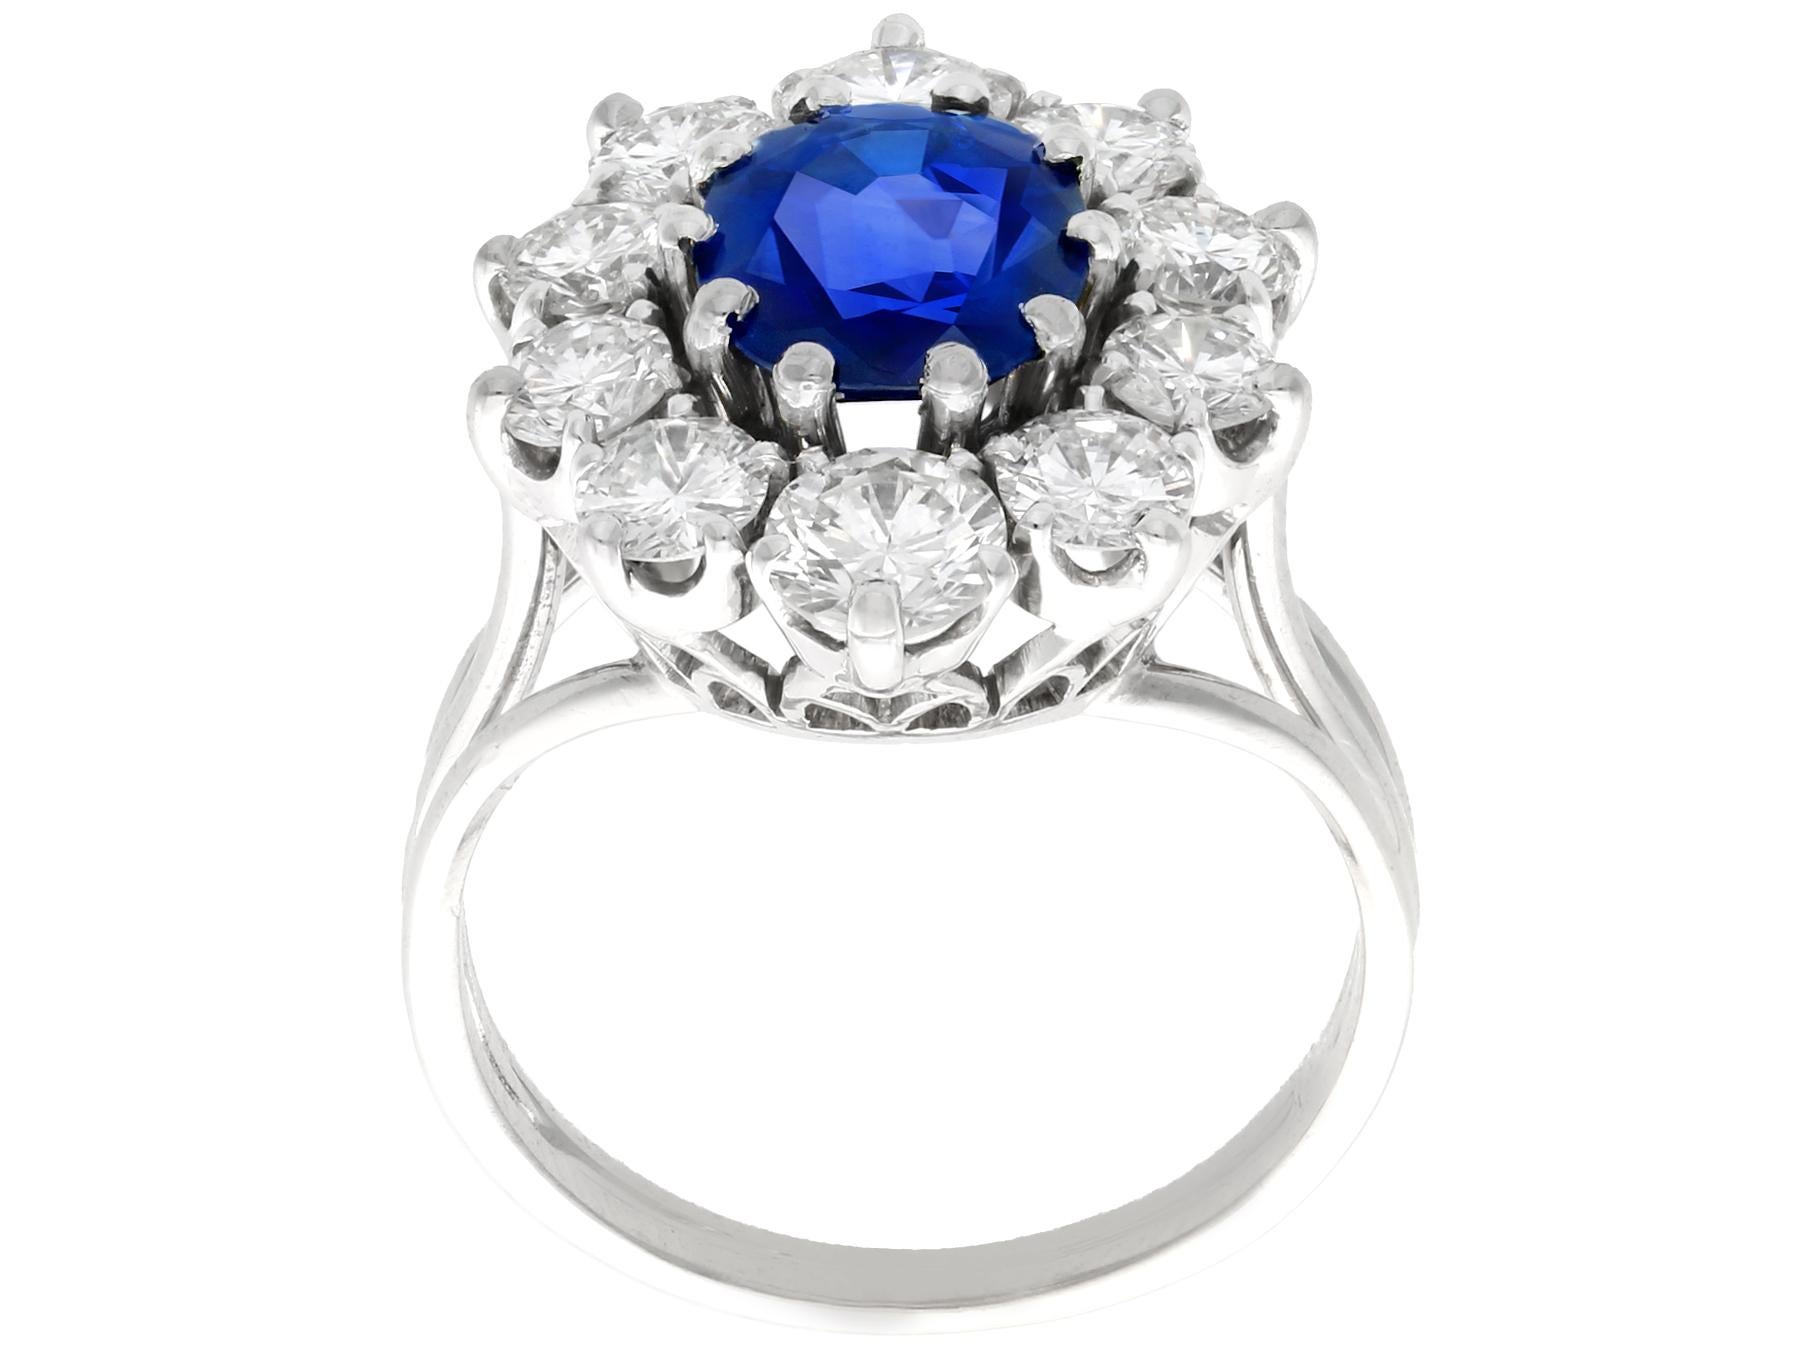 1970s 1.84 Carat Oval Cut Burmese Sapphire and 2.35 Carat Diamond Cluster Ring For Sale 1